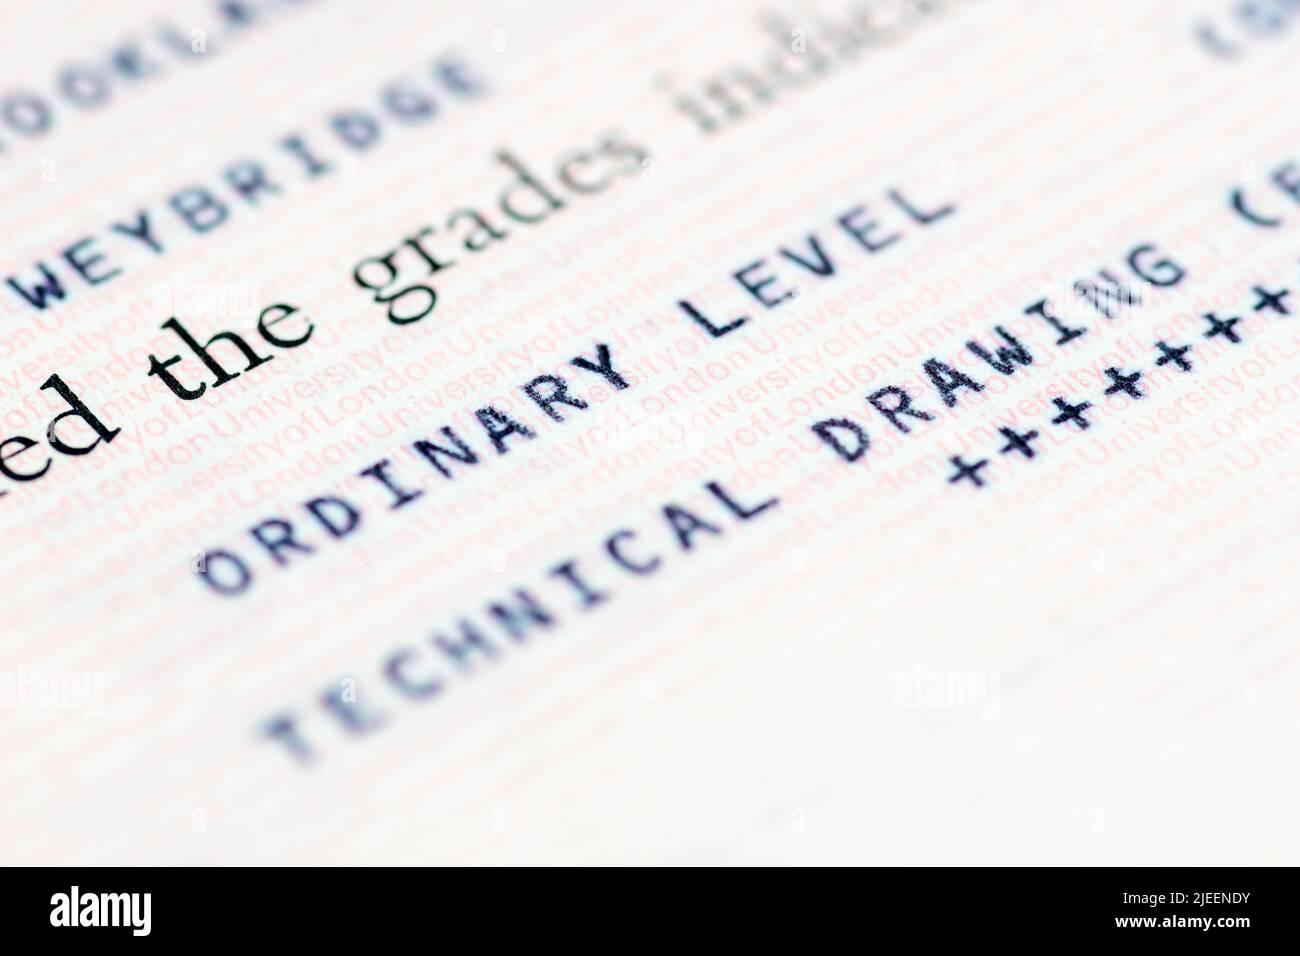 Close up of a United Kingdom education certificate with the holder achieving a grade at the Ordinary Level on a subject of study. Stock Photo